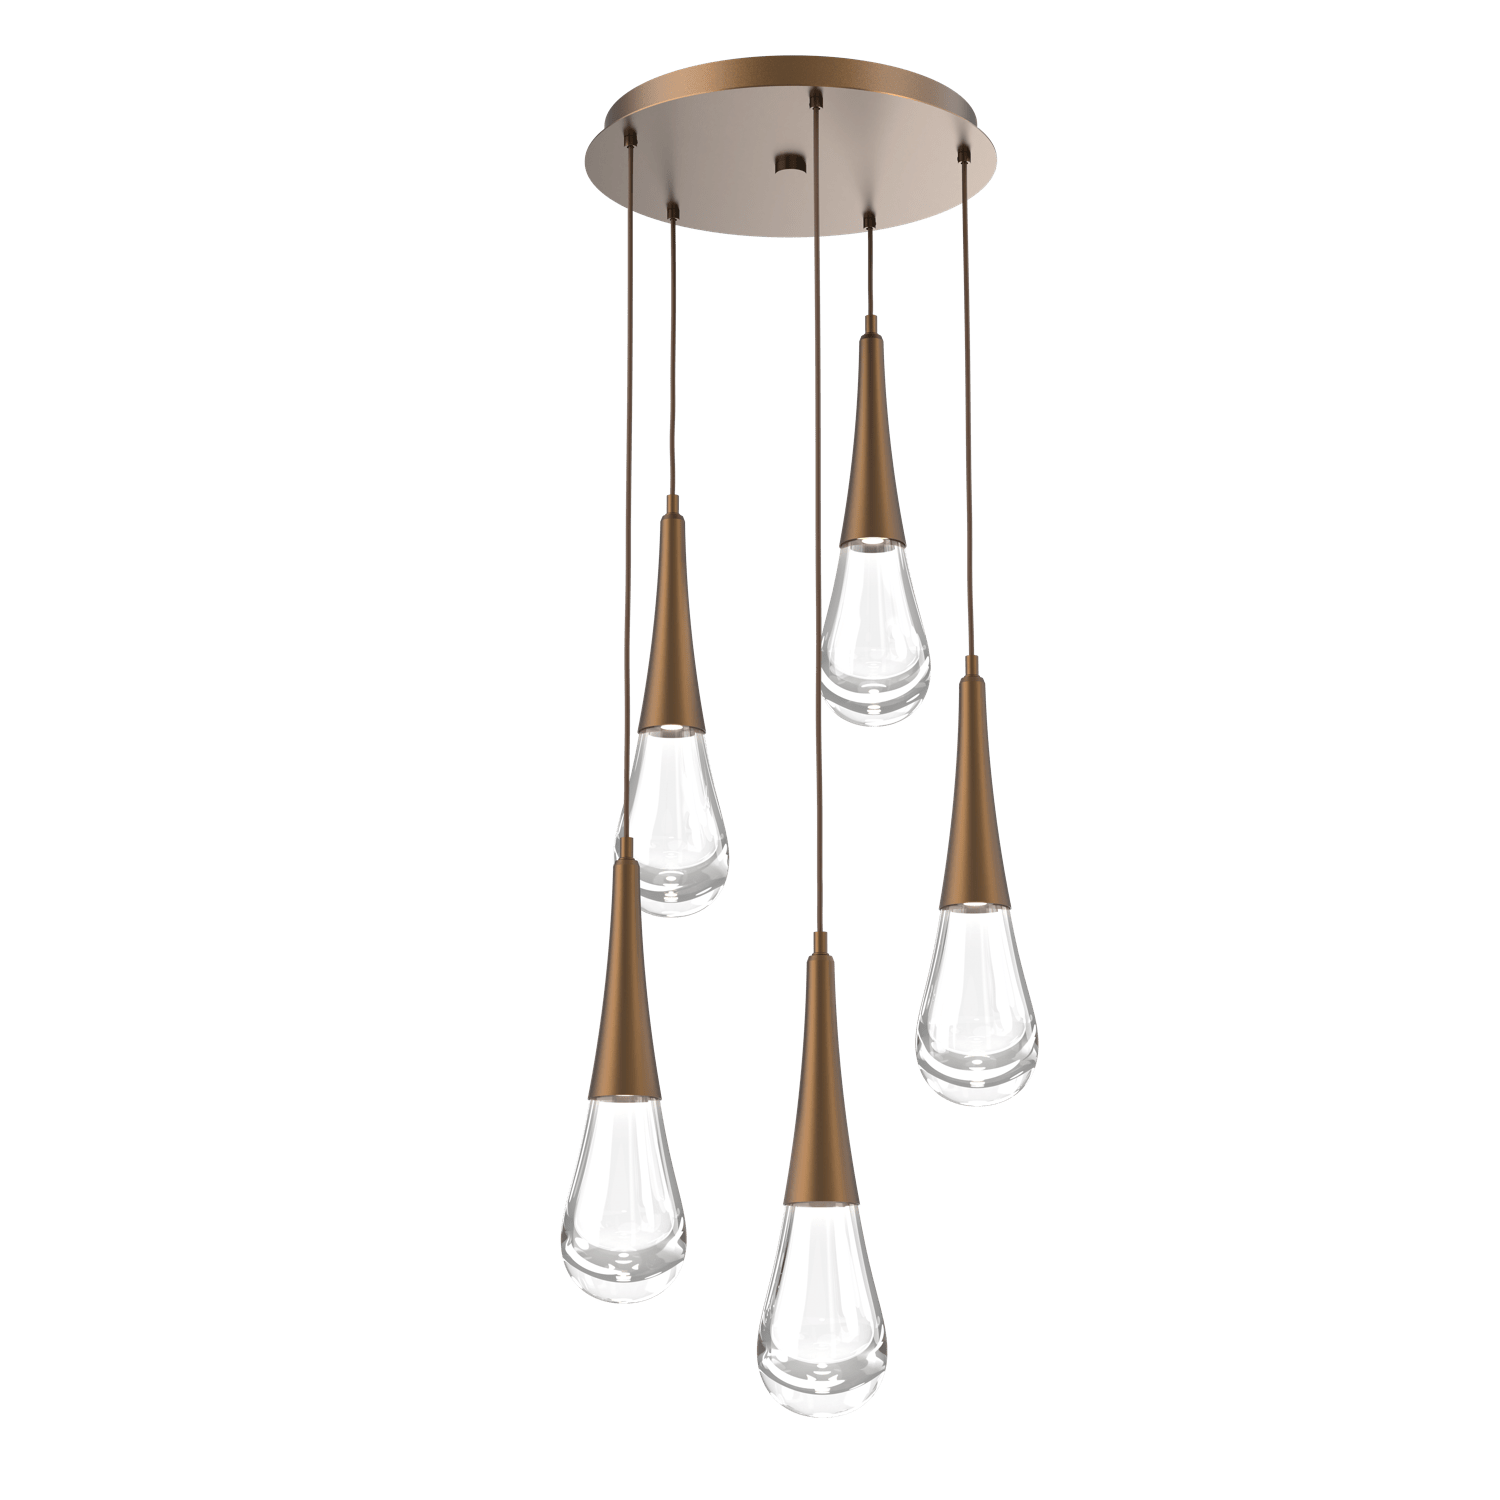 CHB0078-05-FB-Hammerton-Studio-Raindrop-5-light-round-pendant-chandelier-with-flat-bronze-finish-and-clear-blown-glass-shades-and-LED-lamping